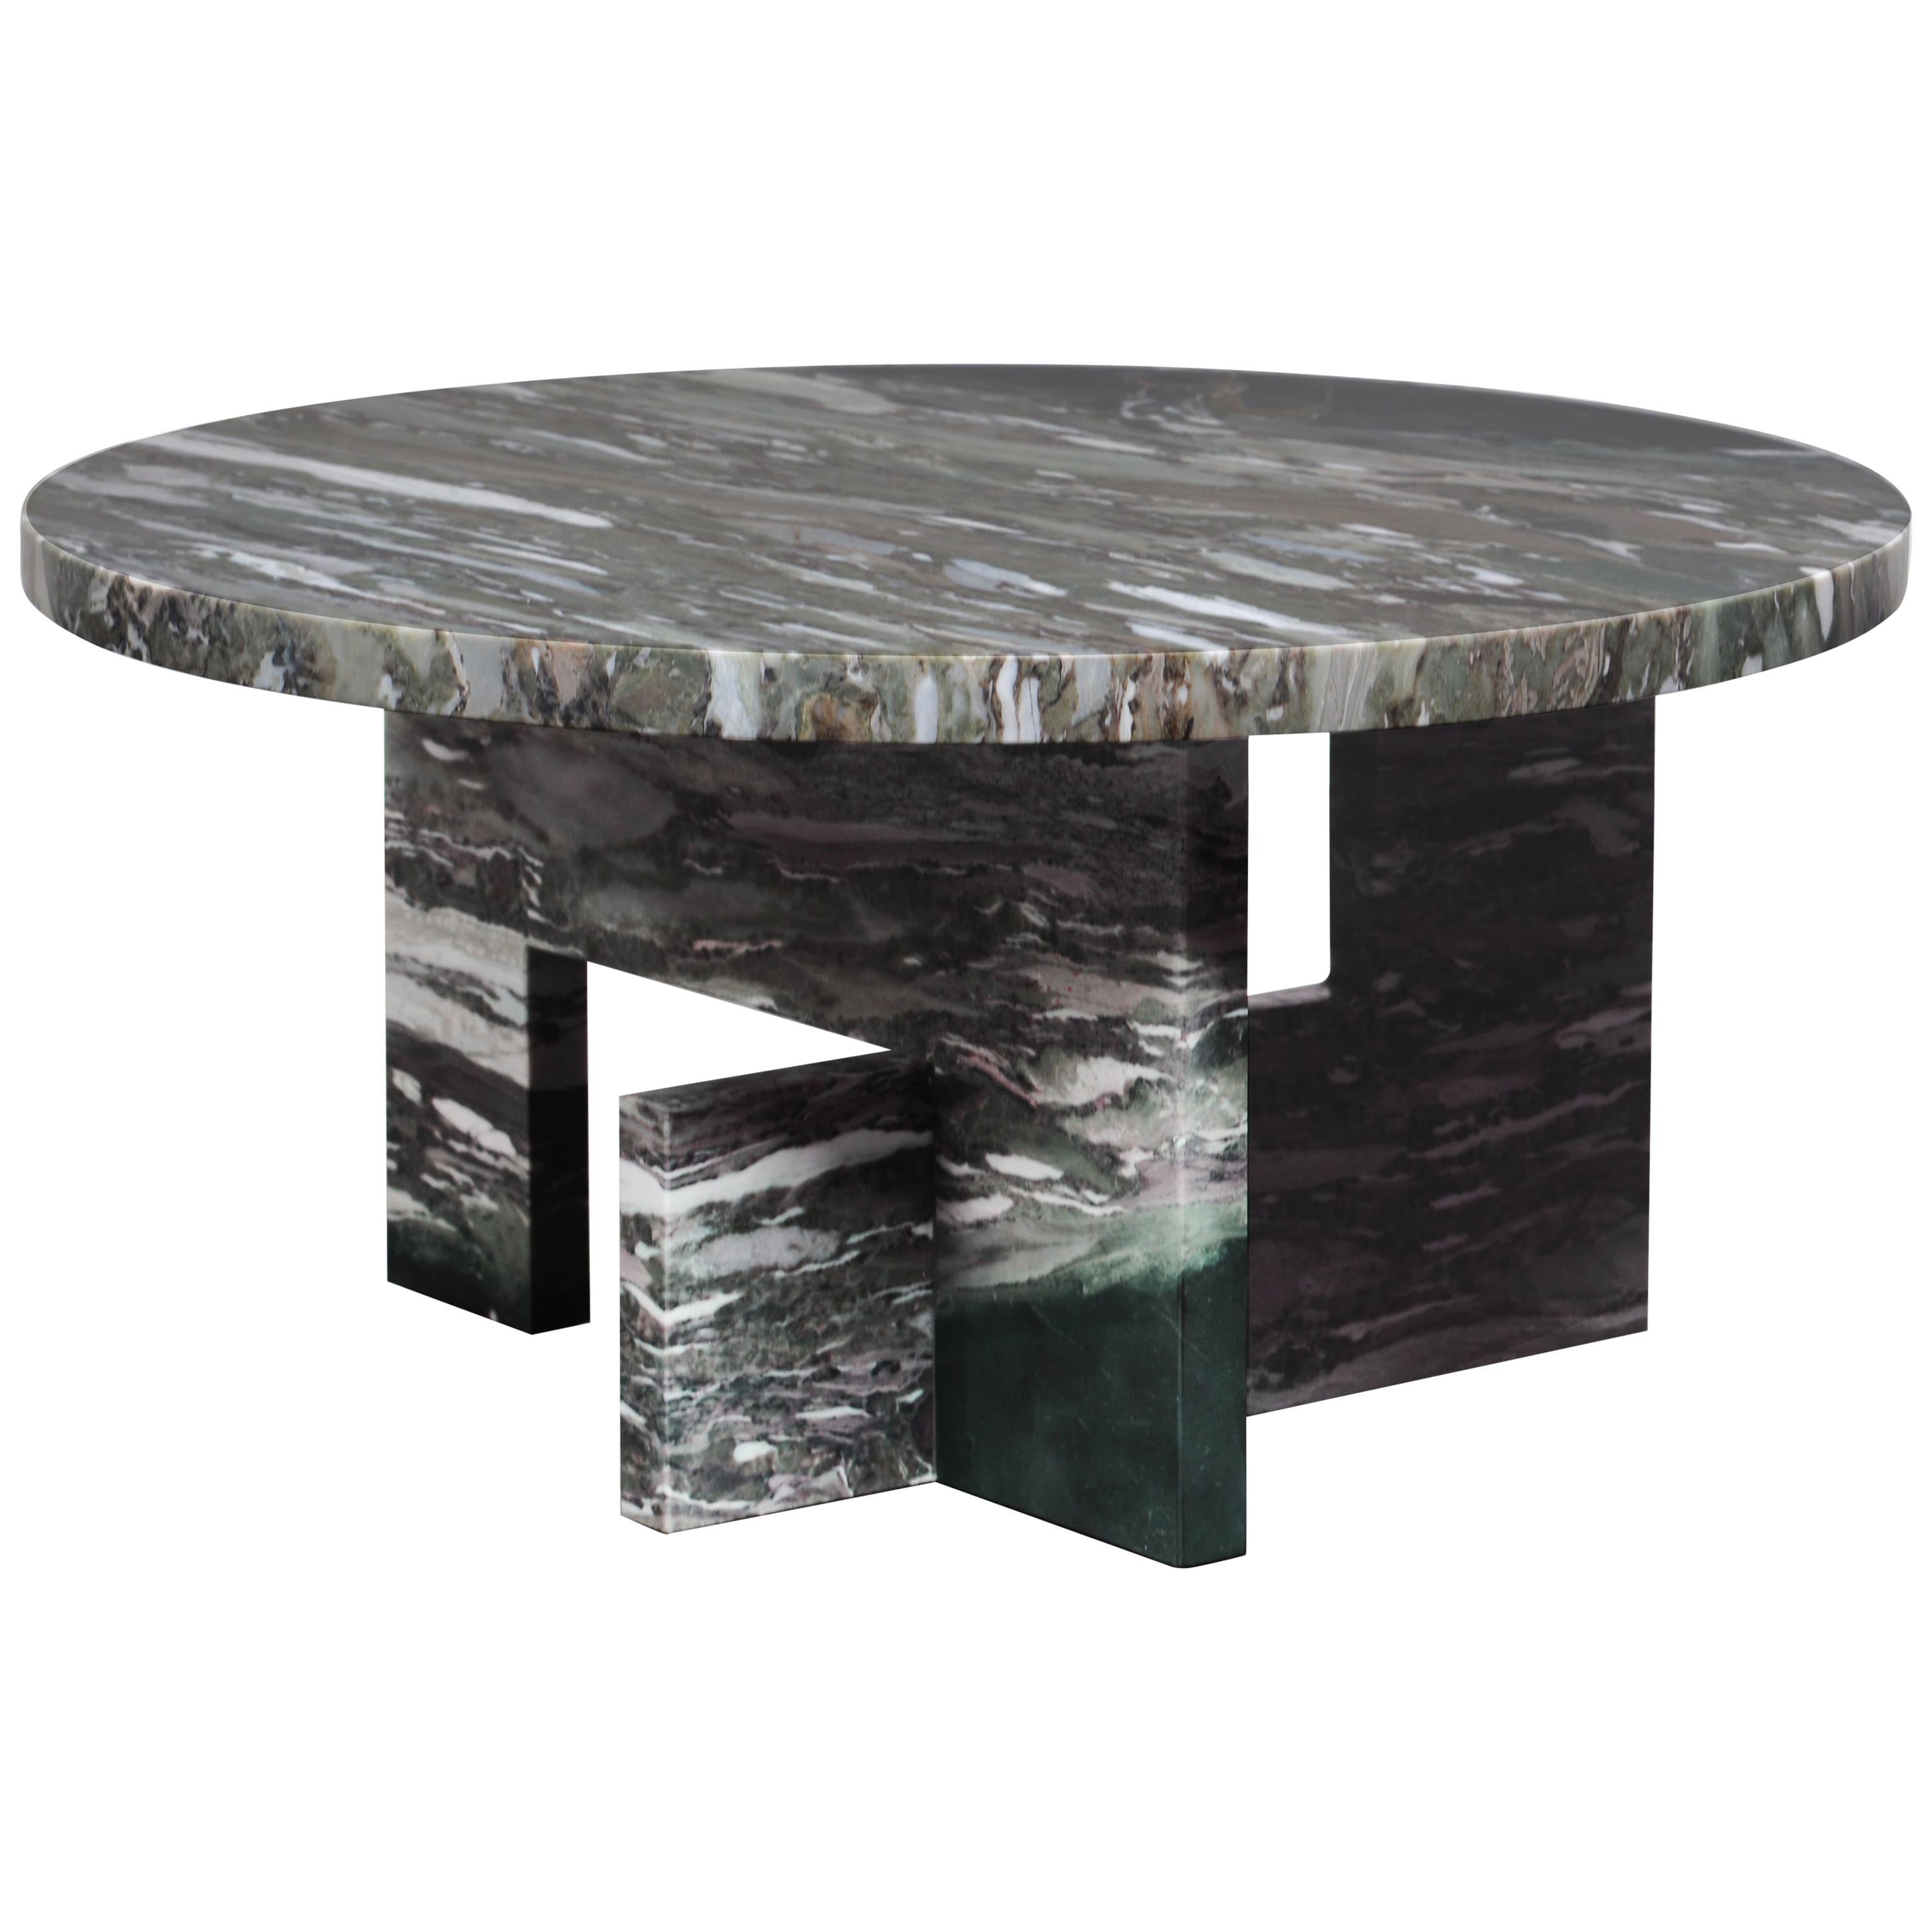 Palazzo Low Marble Table by Sébastien Caporusso